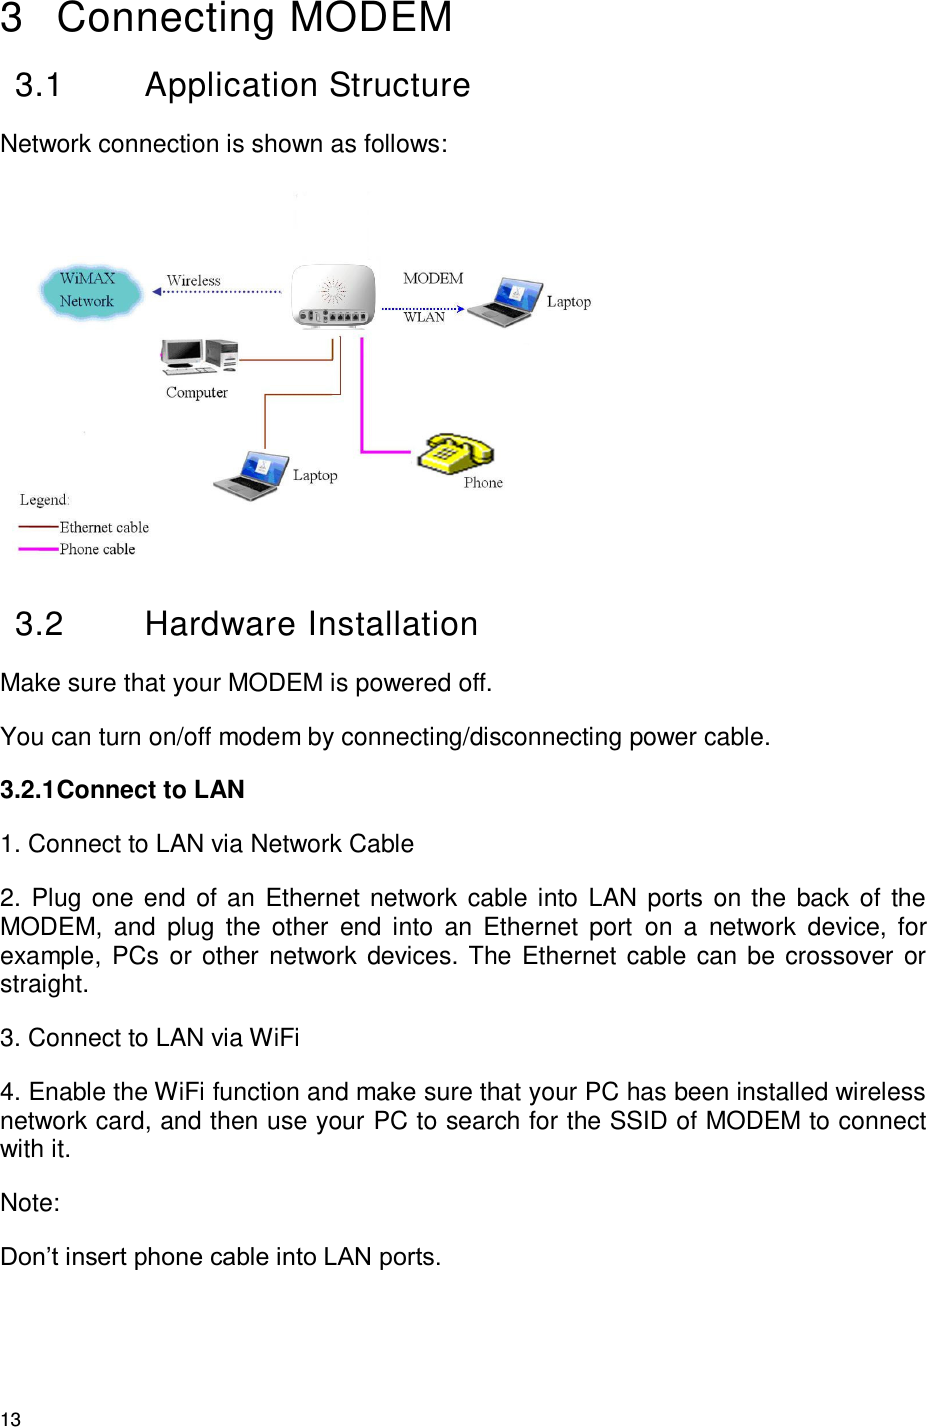 13 3  Connecting MODEM 3.1  Application Structure Network connection is shown as follows:    3.2  Hardware Installation Make sure that your MODEM is powered off. You can turn on/off modem by connecting/disconnecting power cable. 3.2.1 Connect to LAN 1. Connect to LAN via Network Cable   2. Plug one end of an Ethernet network cable into LAN ports on the back of the MODEM,  and  plug  the  other  end  into  an  Ethernet  port  on  a  network  device,  for example, PCs or other network devices. The Ethernet cable can be crossover or straight.   3. Connect to LAN via WiFi 4. Enable the WiFi function and make sure that your PC has been installed wireless network card, and then use your PC to search for the SSID of MODEM to connect with it.     Note: Don’t insert phone cable into LAN ports. 